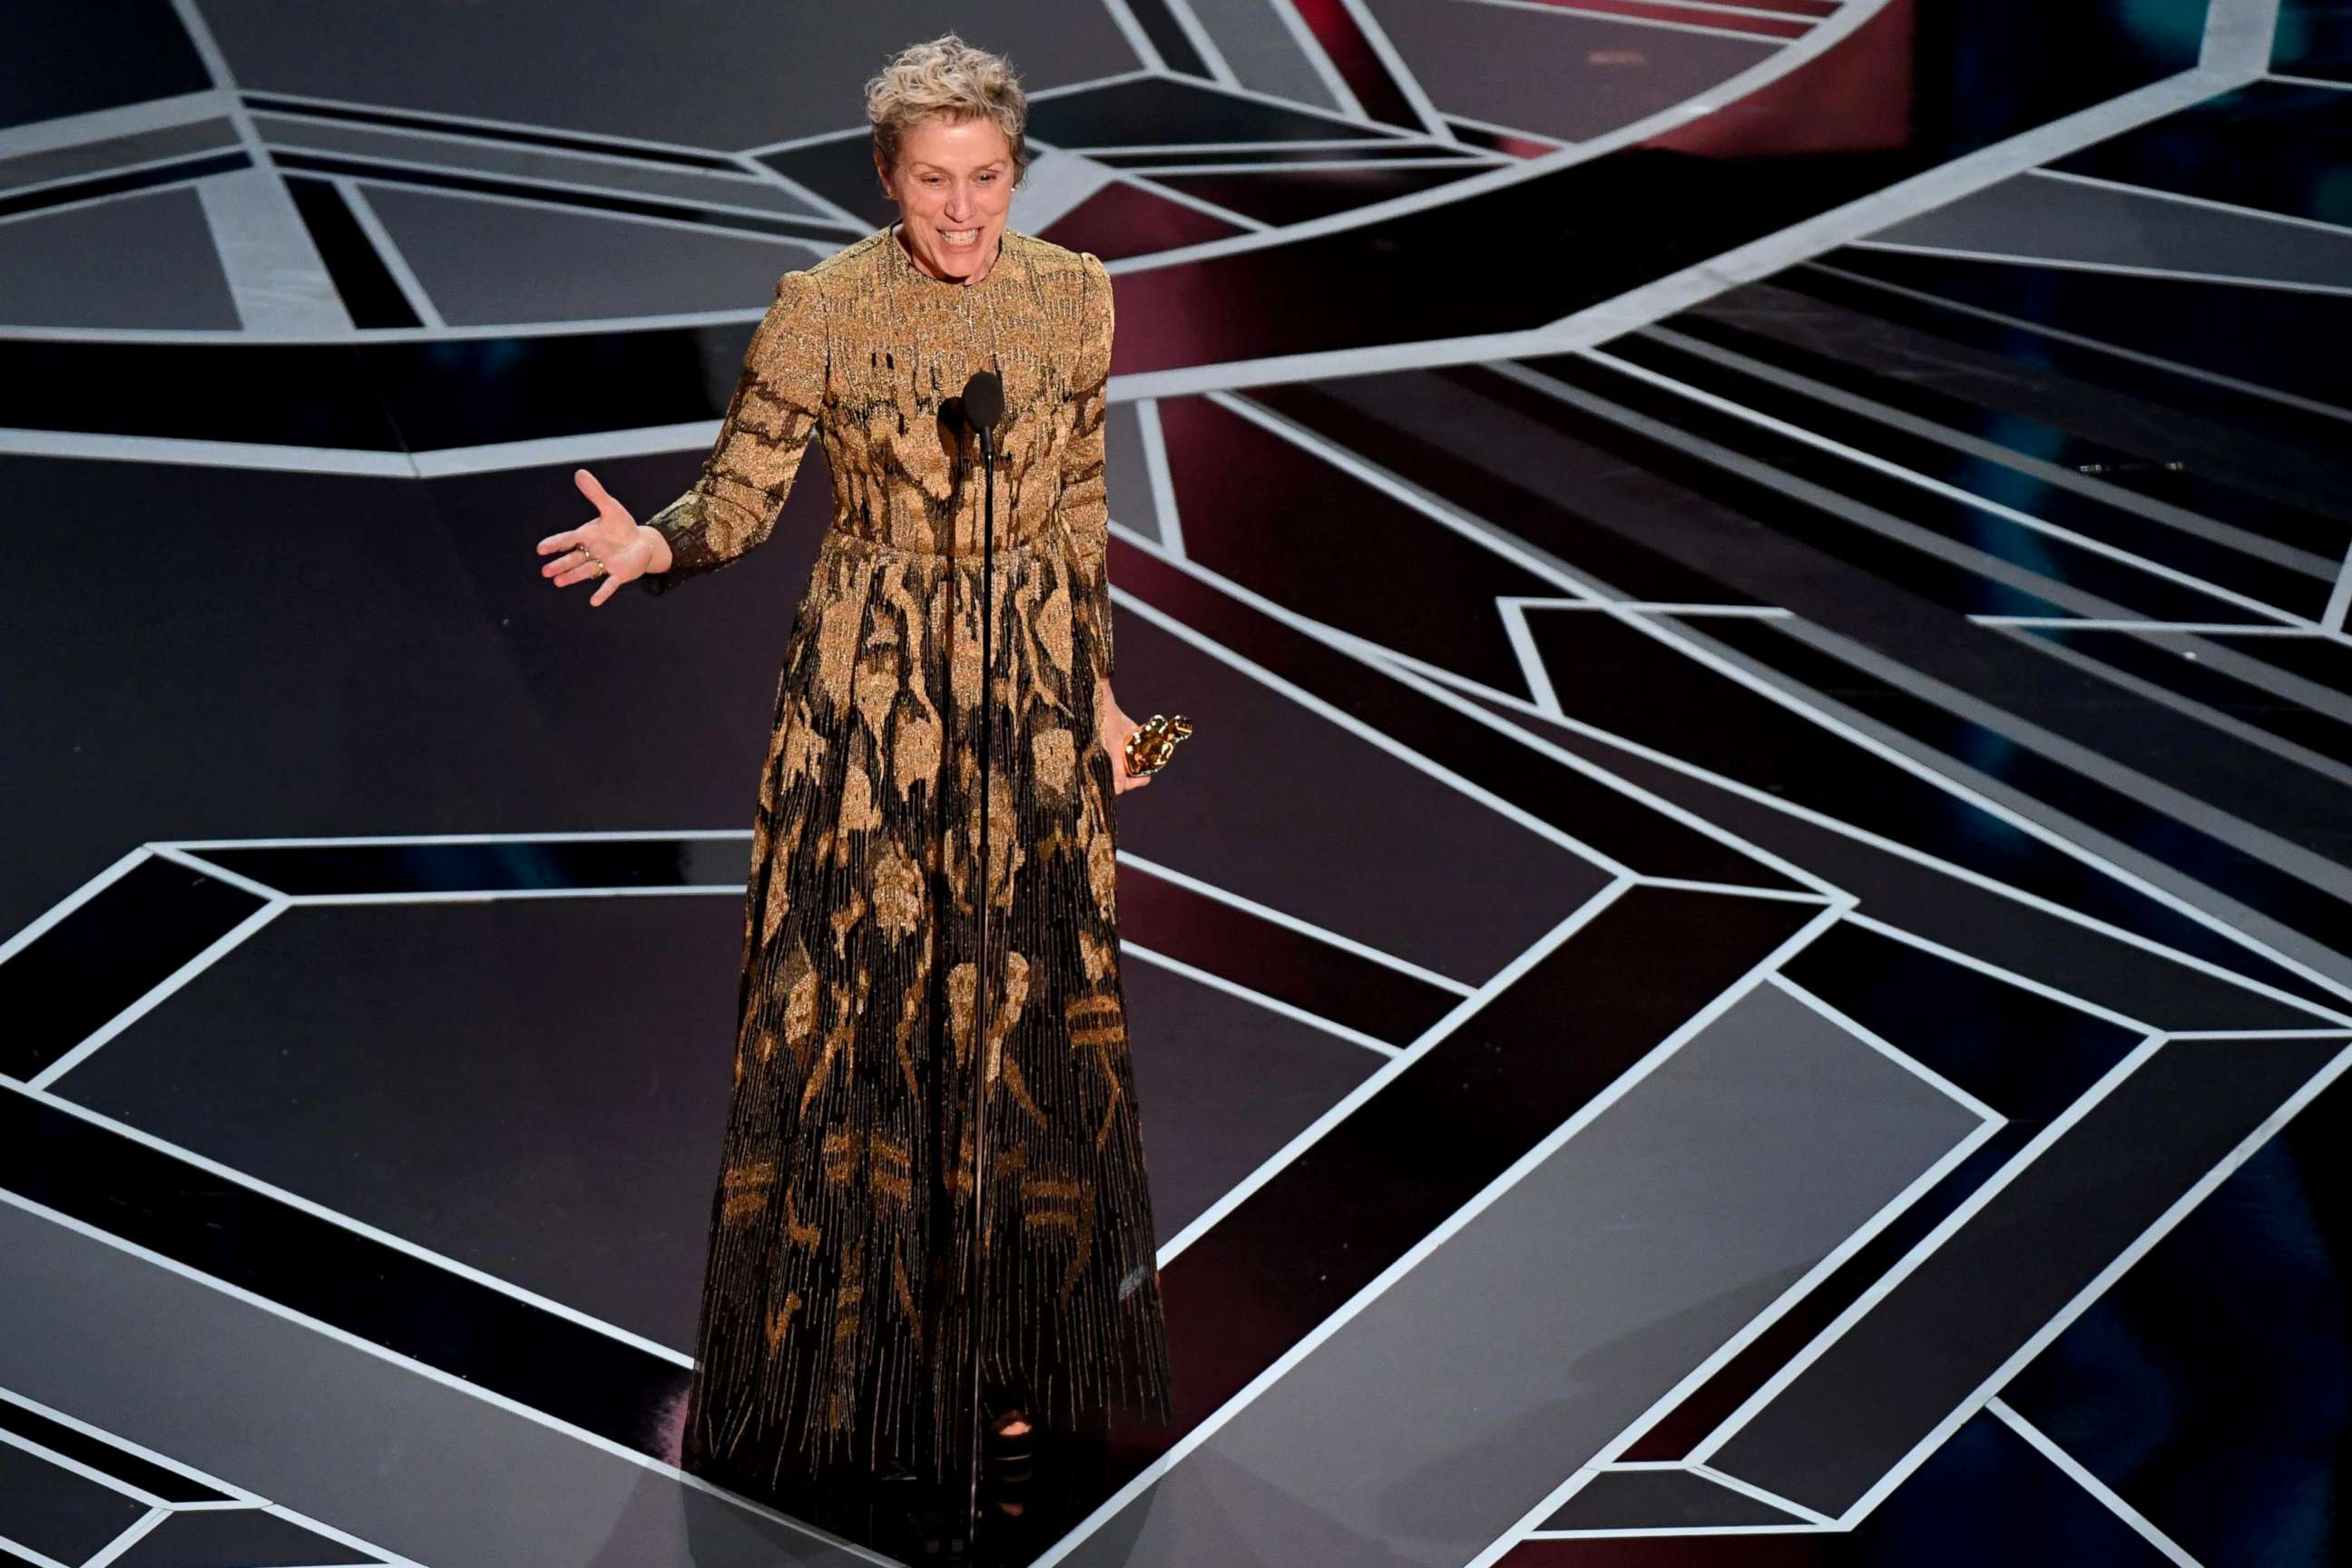 PHOTO: Actress Frances McDormand delivers a speech after she won the Oscar for Best Actress in "Three Billboards outside Ebbing, Missouri" during the 90th Annual Academy Awards show, March 4, 2018, in Hollywood, Calif.